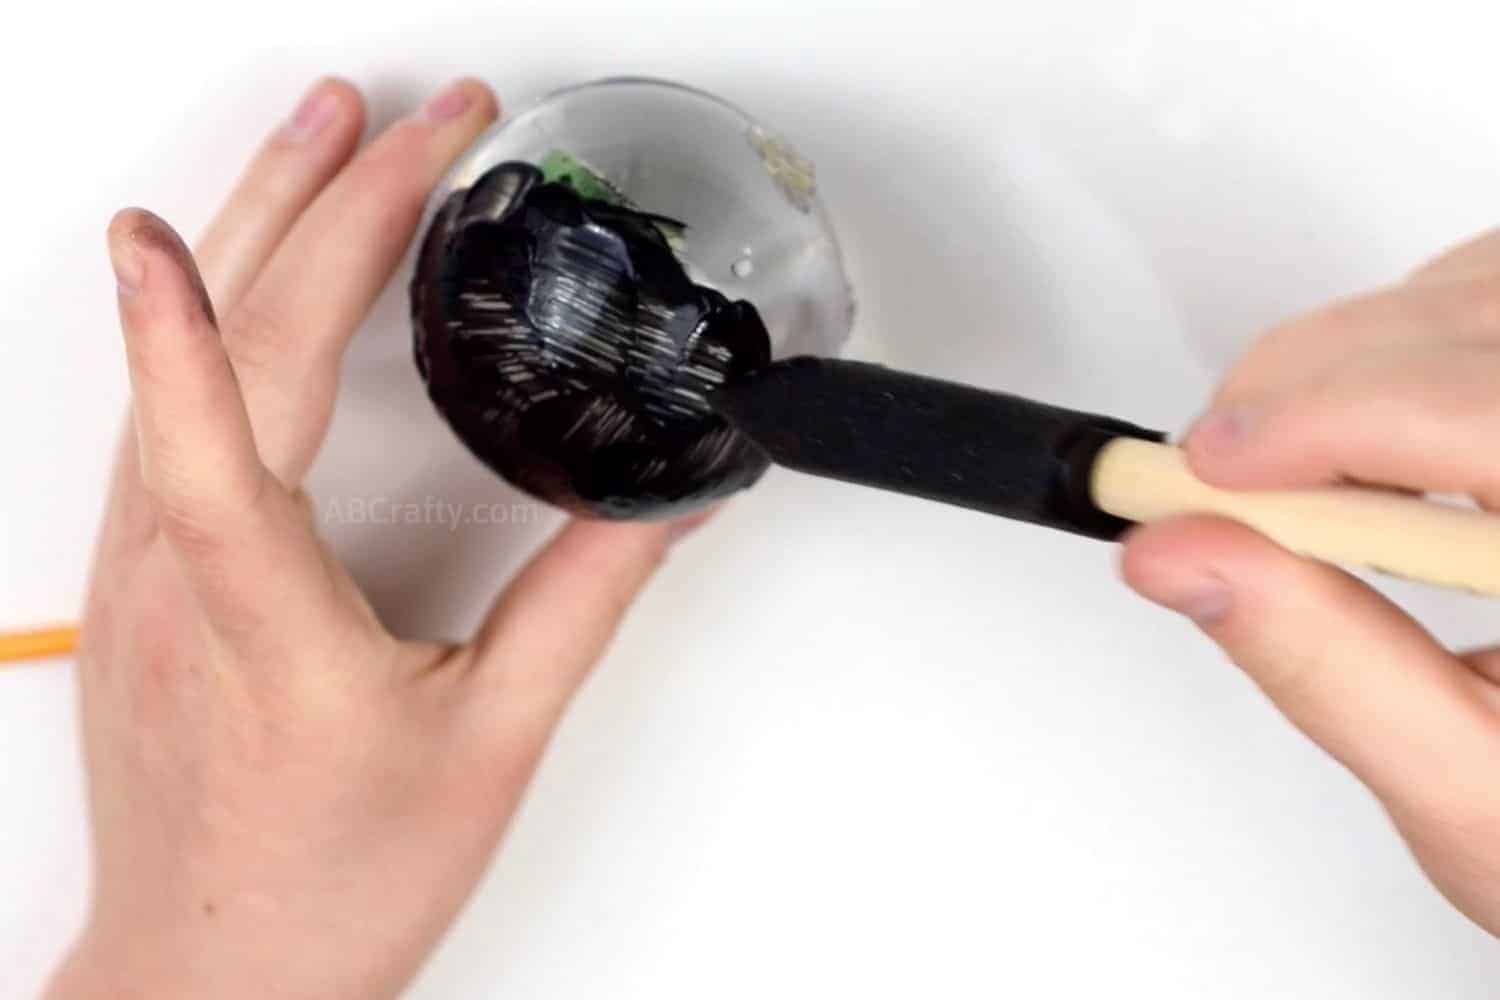 Painting the ornament filled with water with black fabric paint, using a black sponge brush so that it's completely covered like a real magic 8 ball